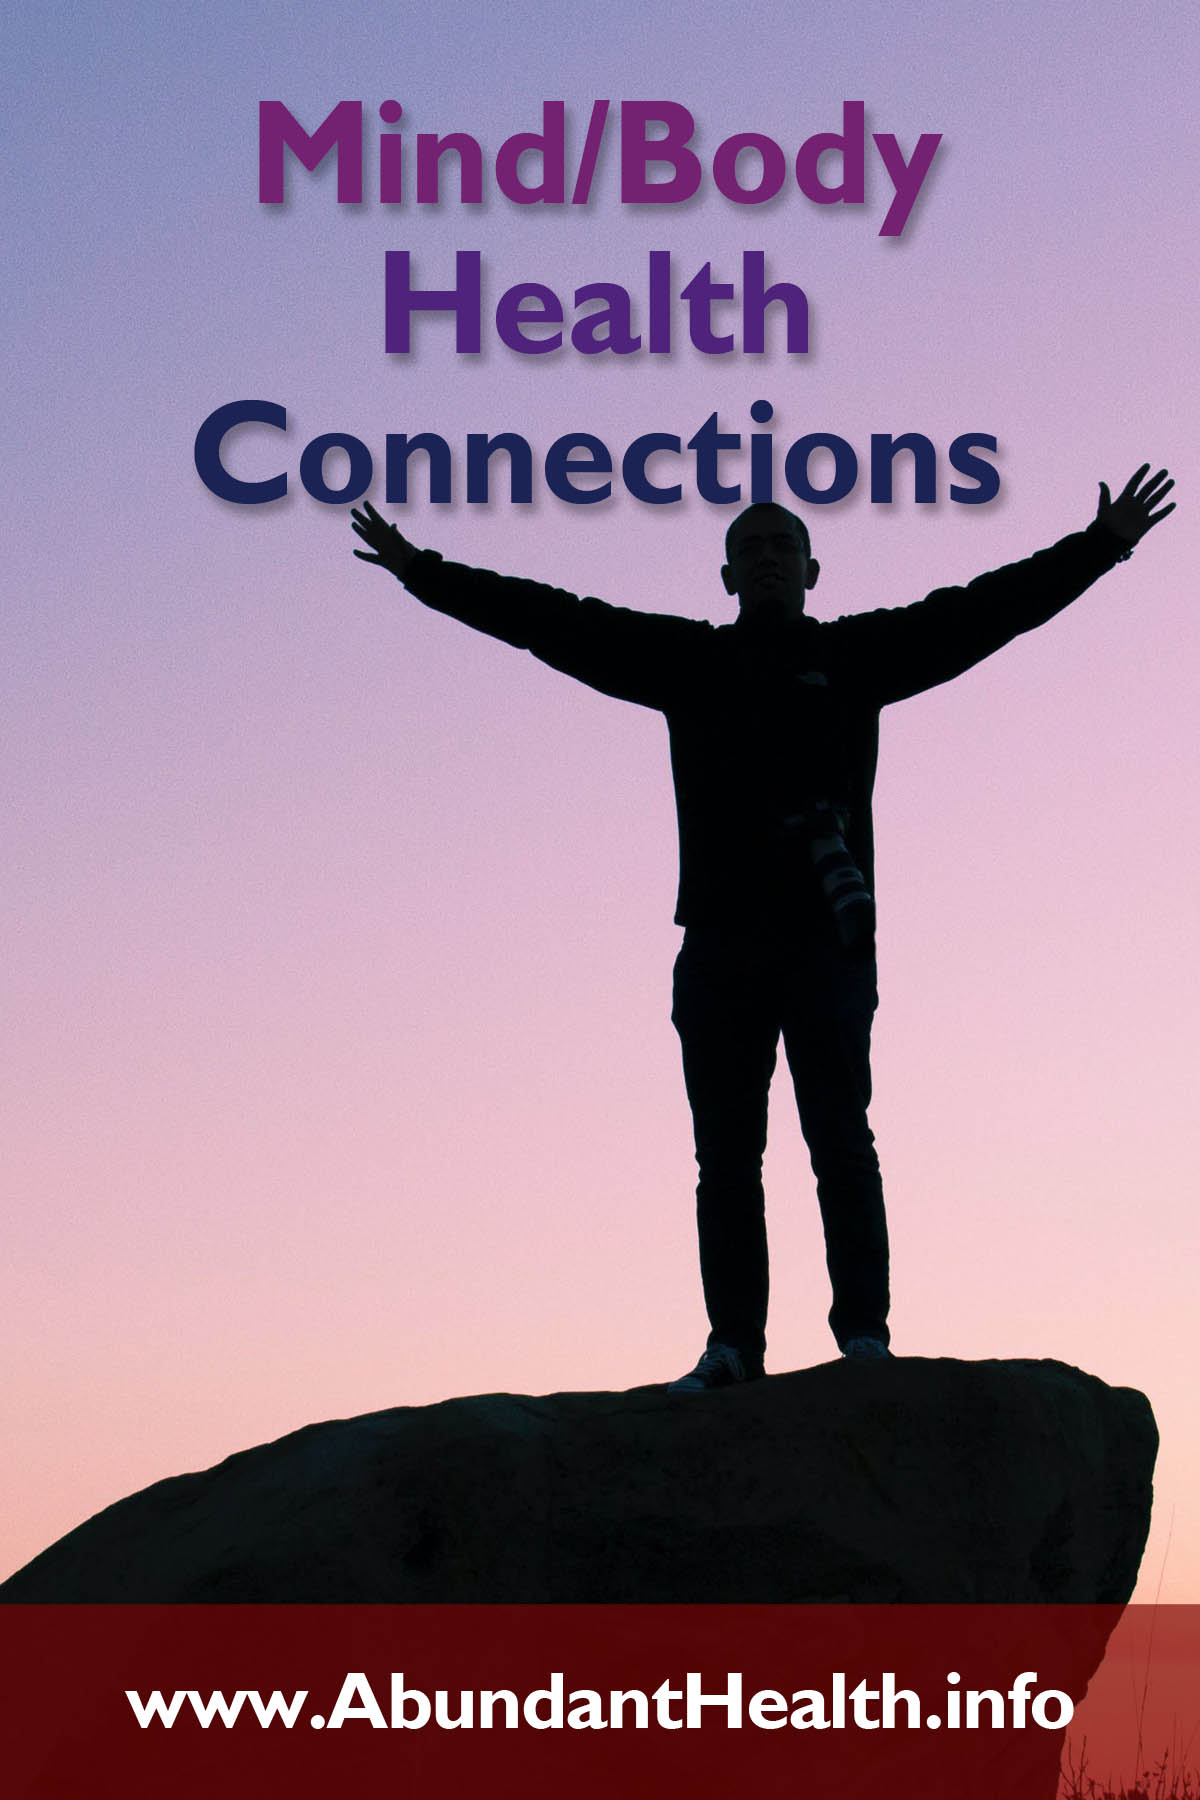 Mind/Body Health Connections